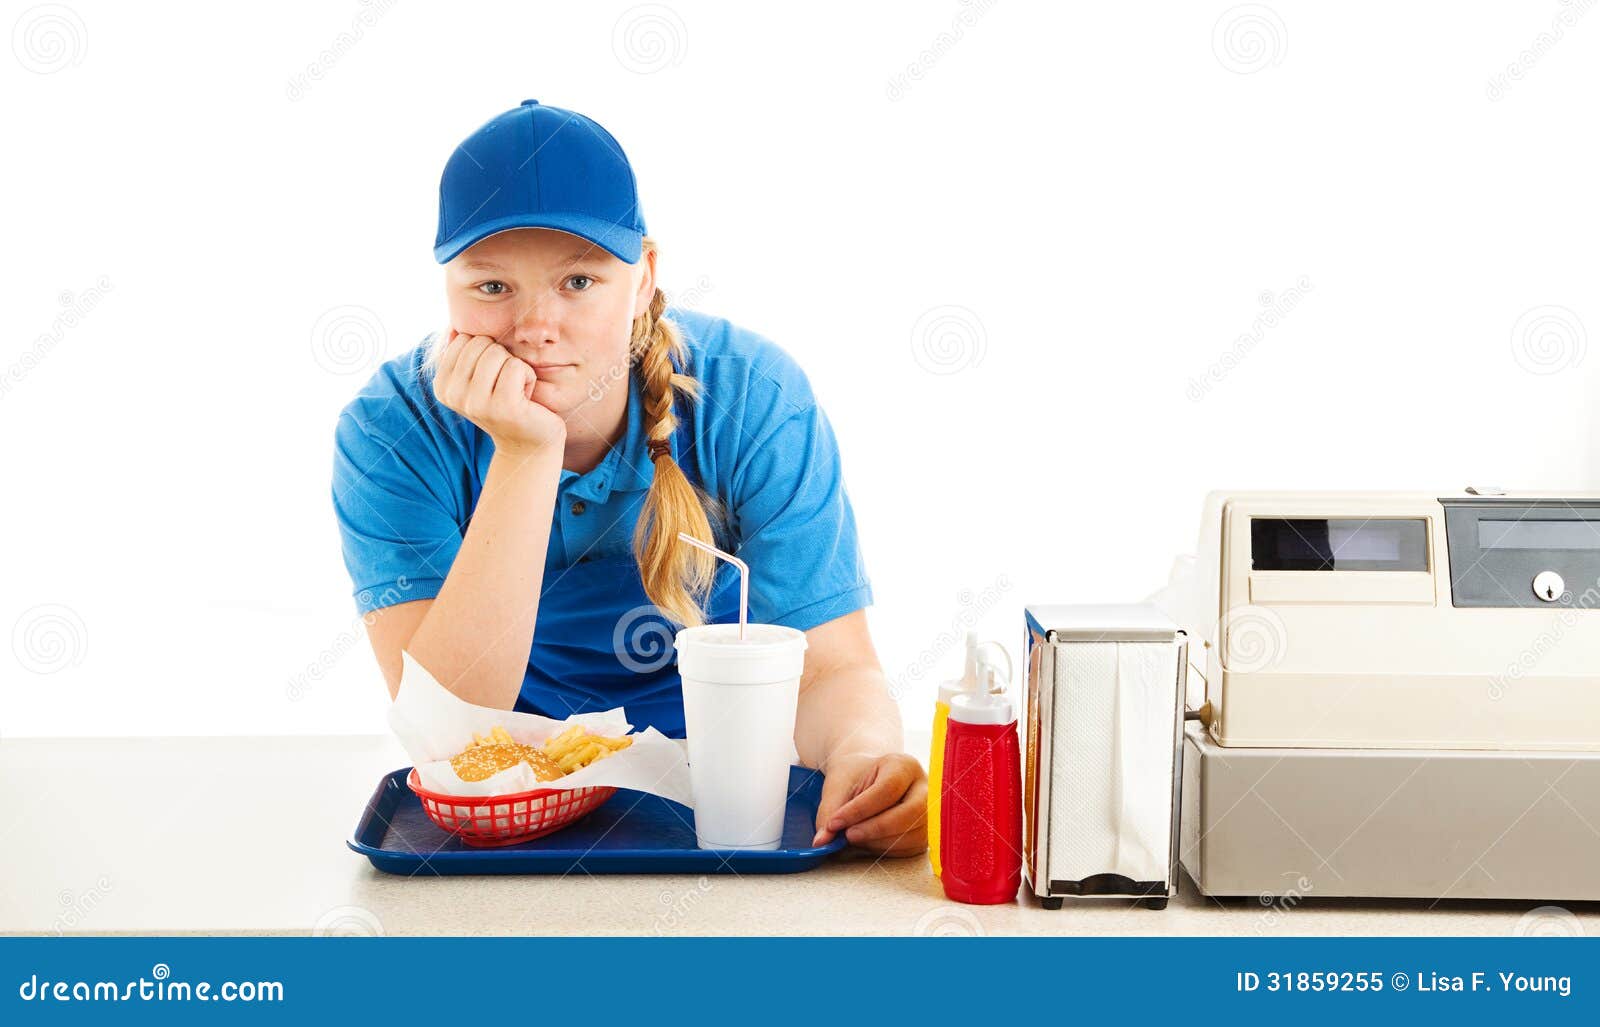 fast food worker clipart - photo #36